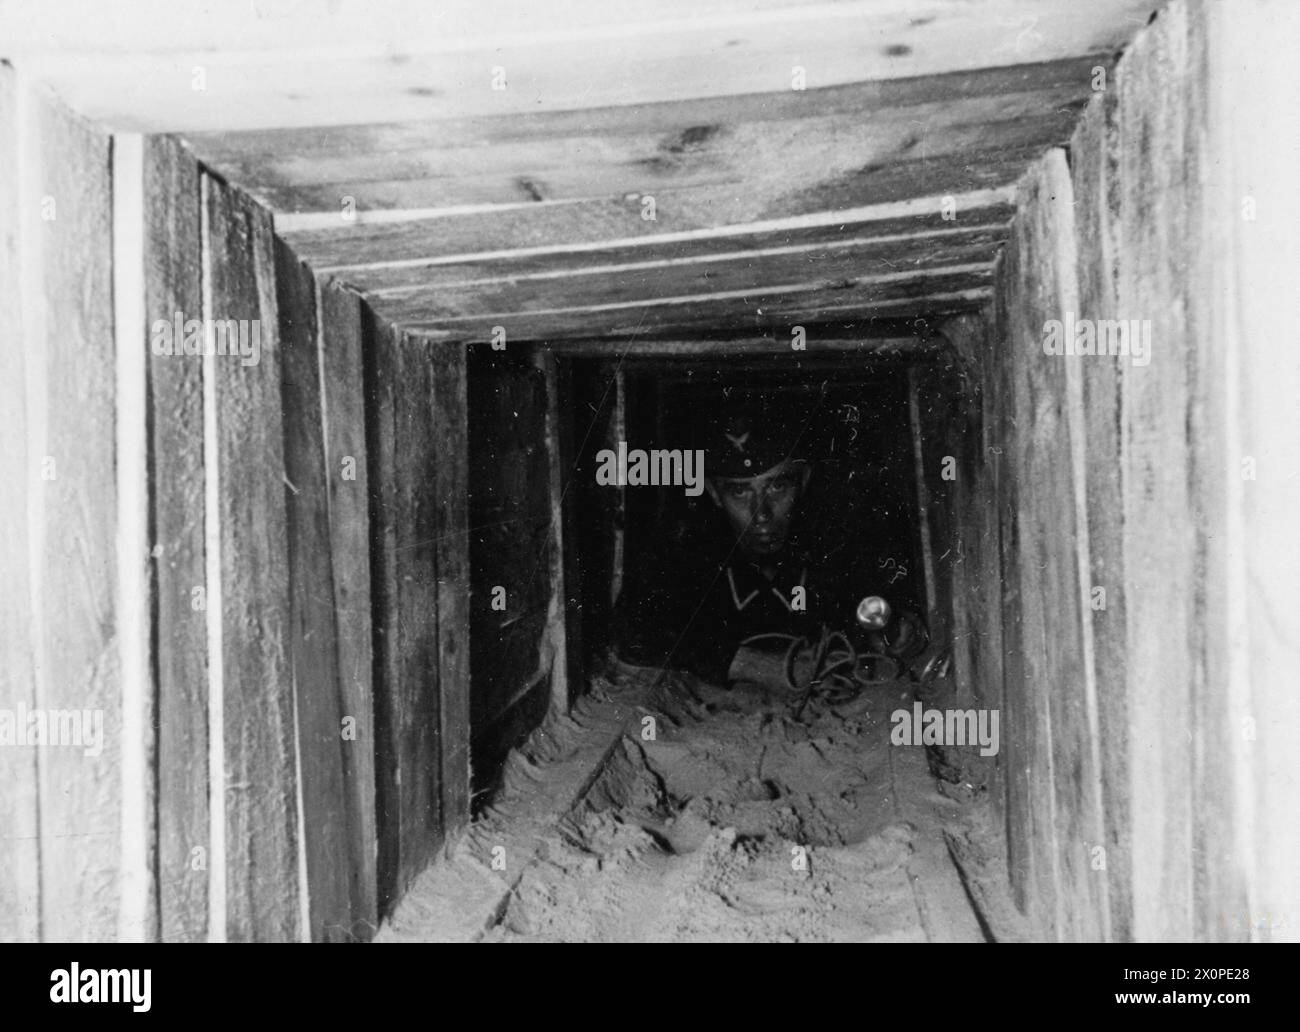 THE GREAT ESCAPE, MARCH 1944 - A German guard in the 'Harry' escape tunnel at Stalag Luft III, Sagan. Photograph probably taken in late March 1944 German Air Force Stock Photo